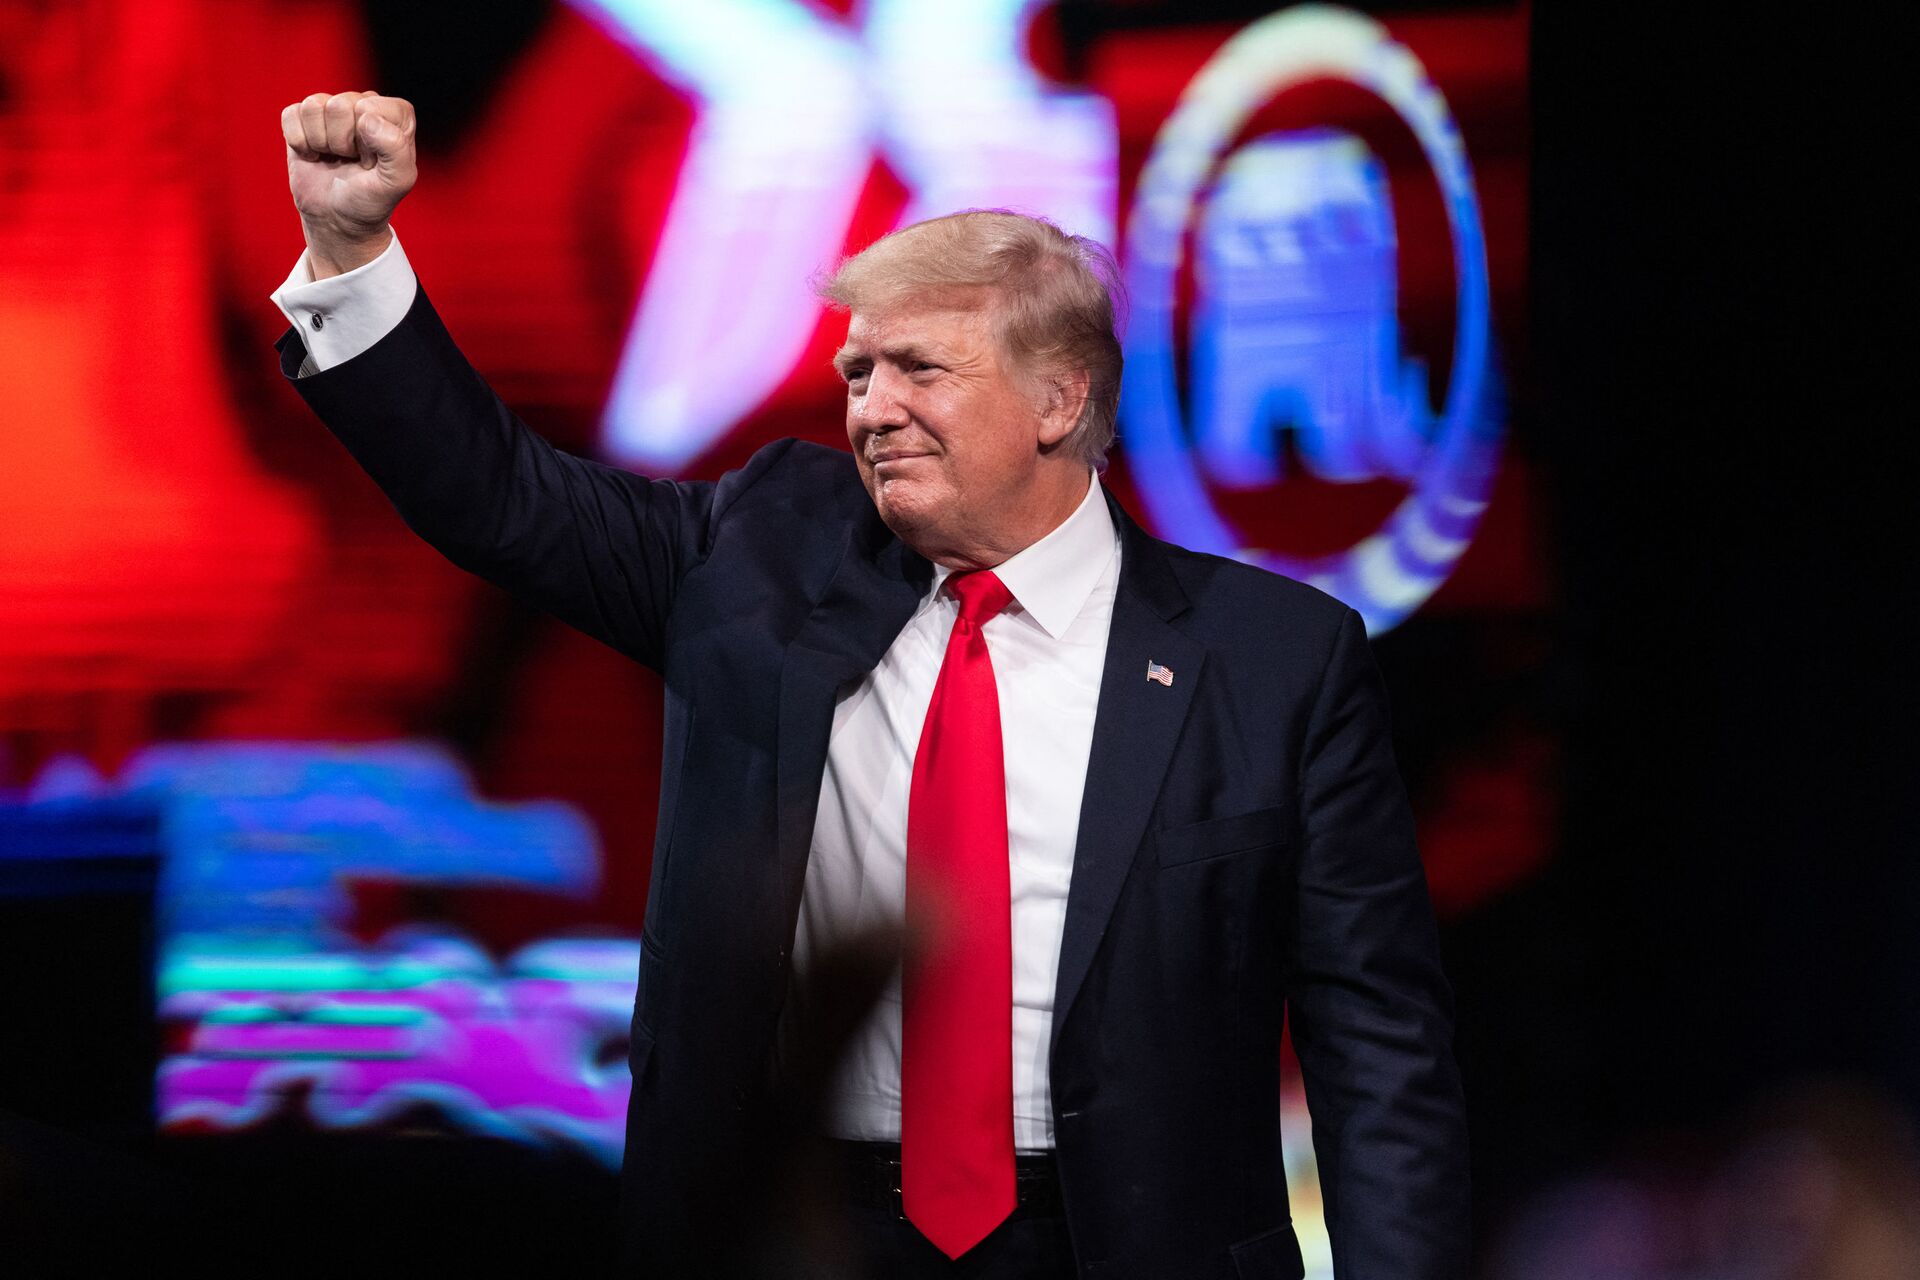 Former US President Donald Trump pumps his fist as he walks off after speaking at the Conservative Political Action Conference (CPAC) in Dallas, Texas on July 11, 2021 - Sputnik International, 1920, 07.09.2021